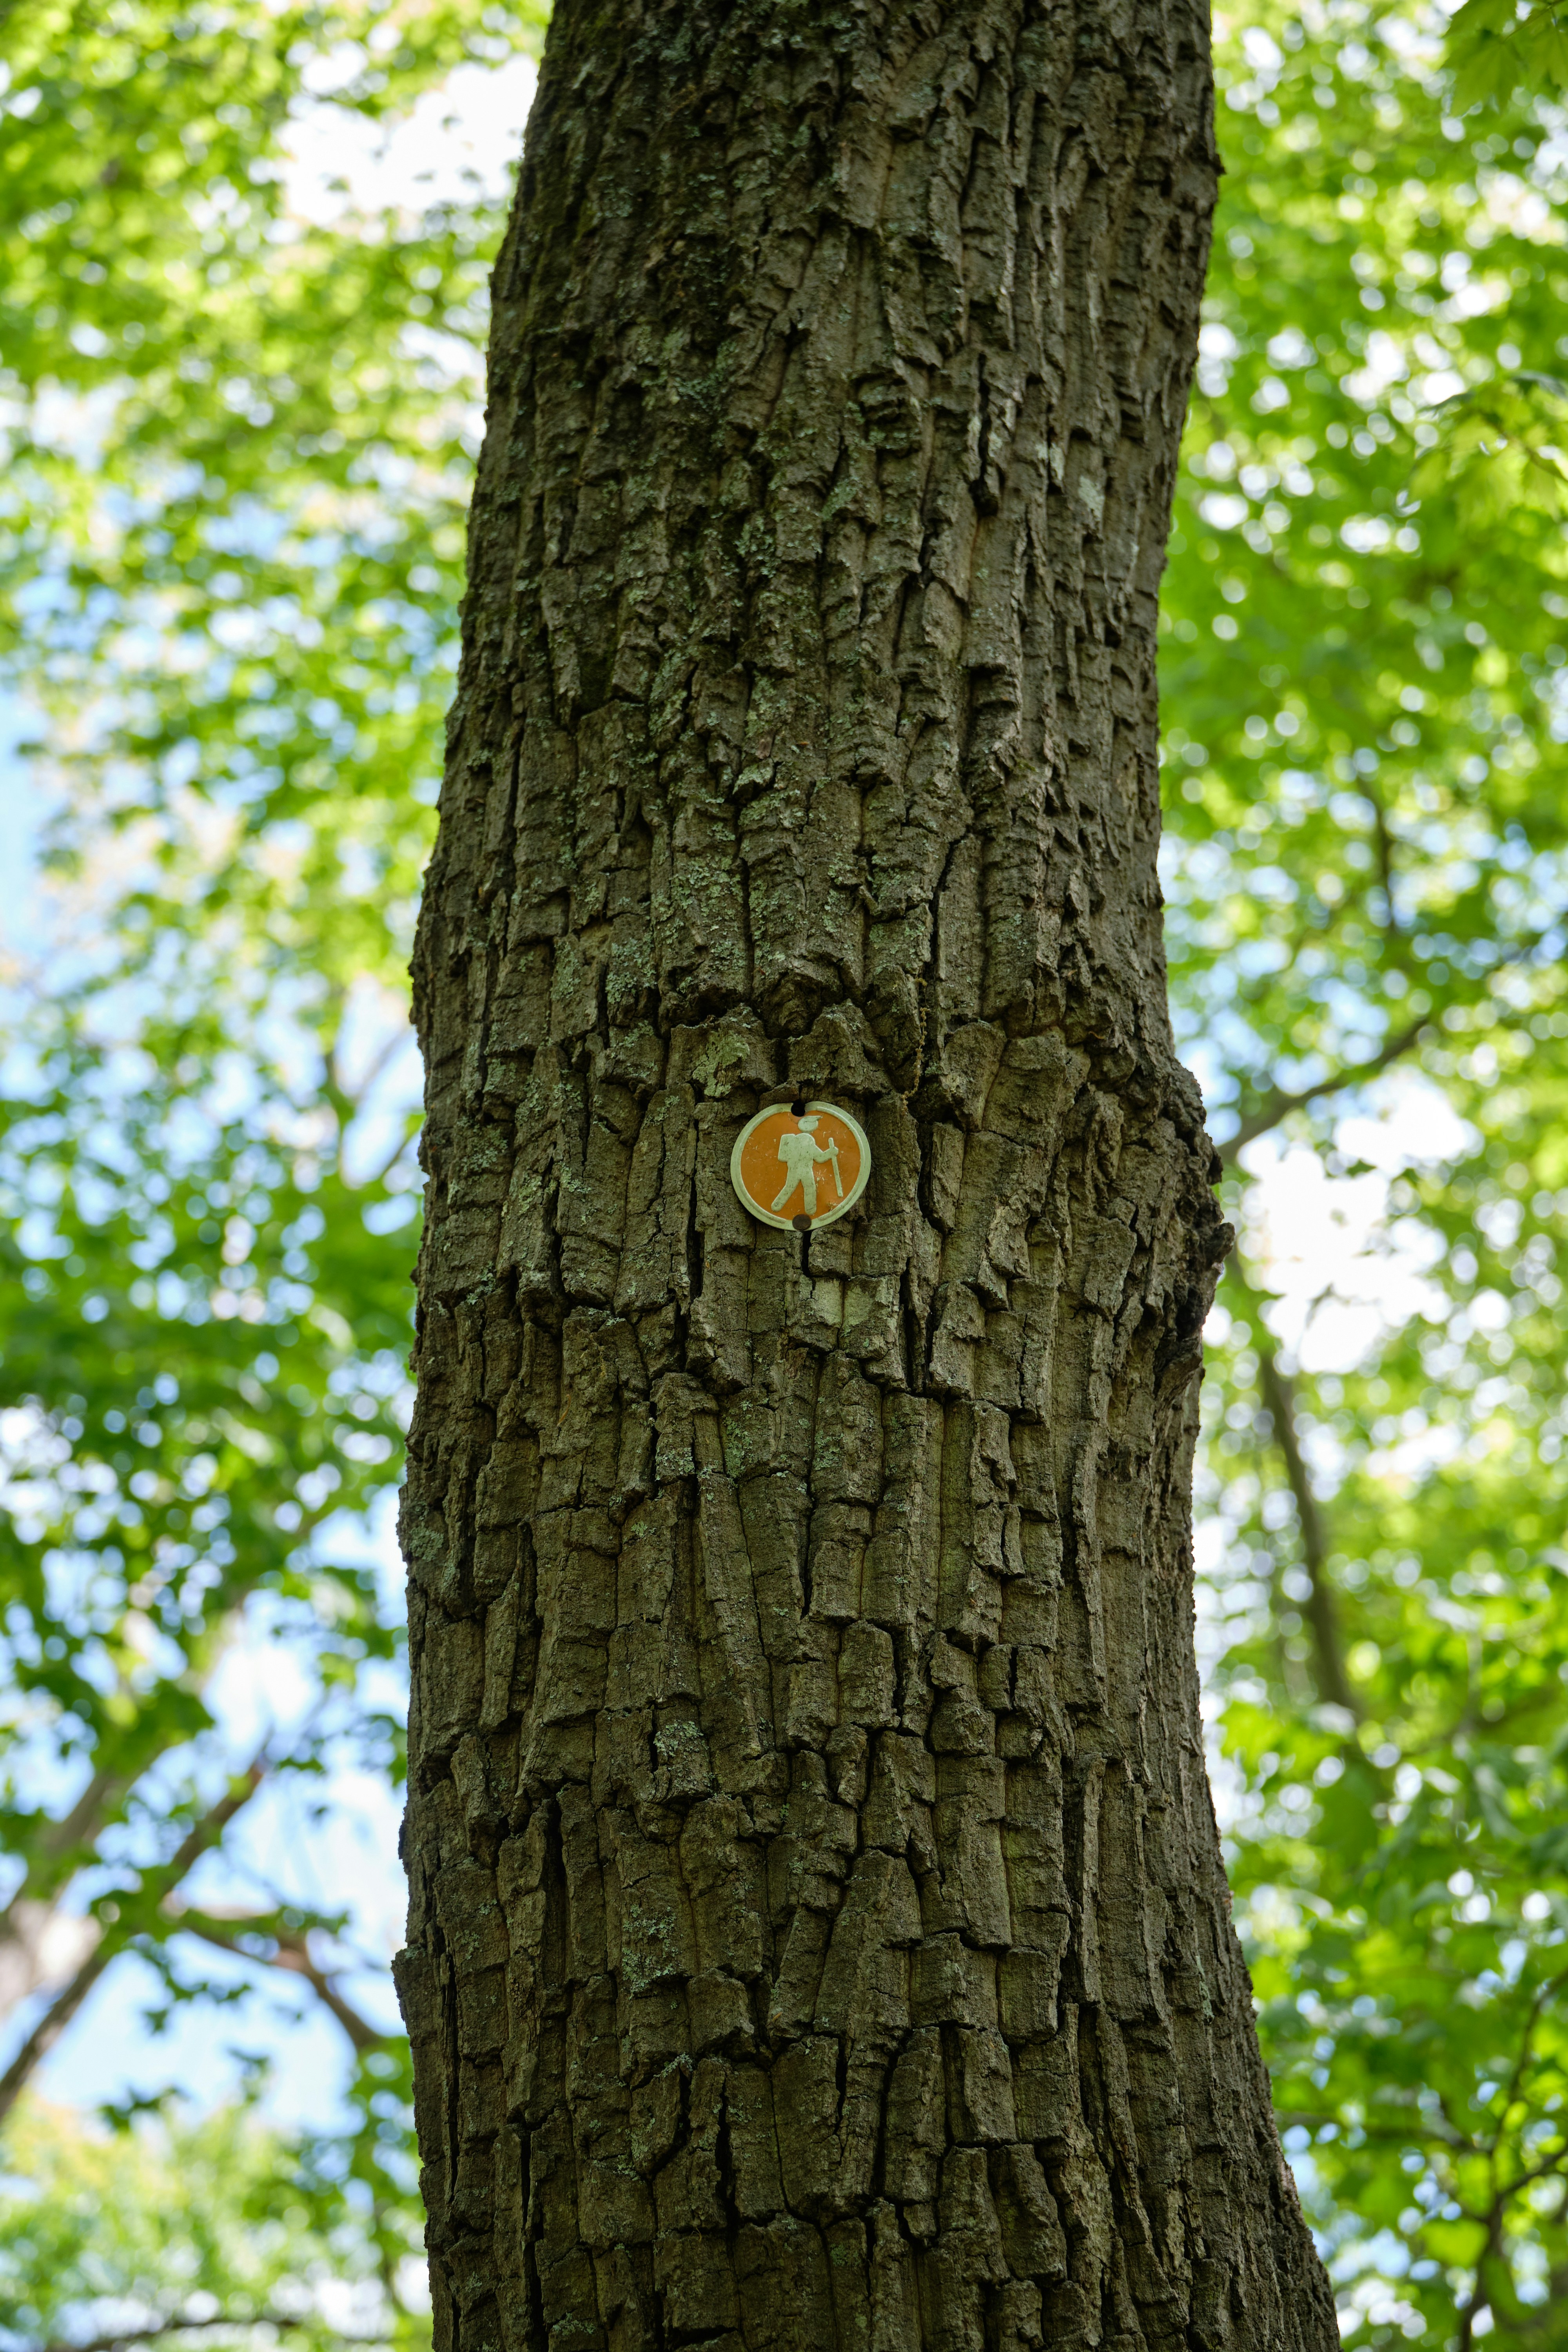 Trail markers from a recent hike.